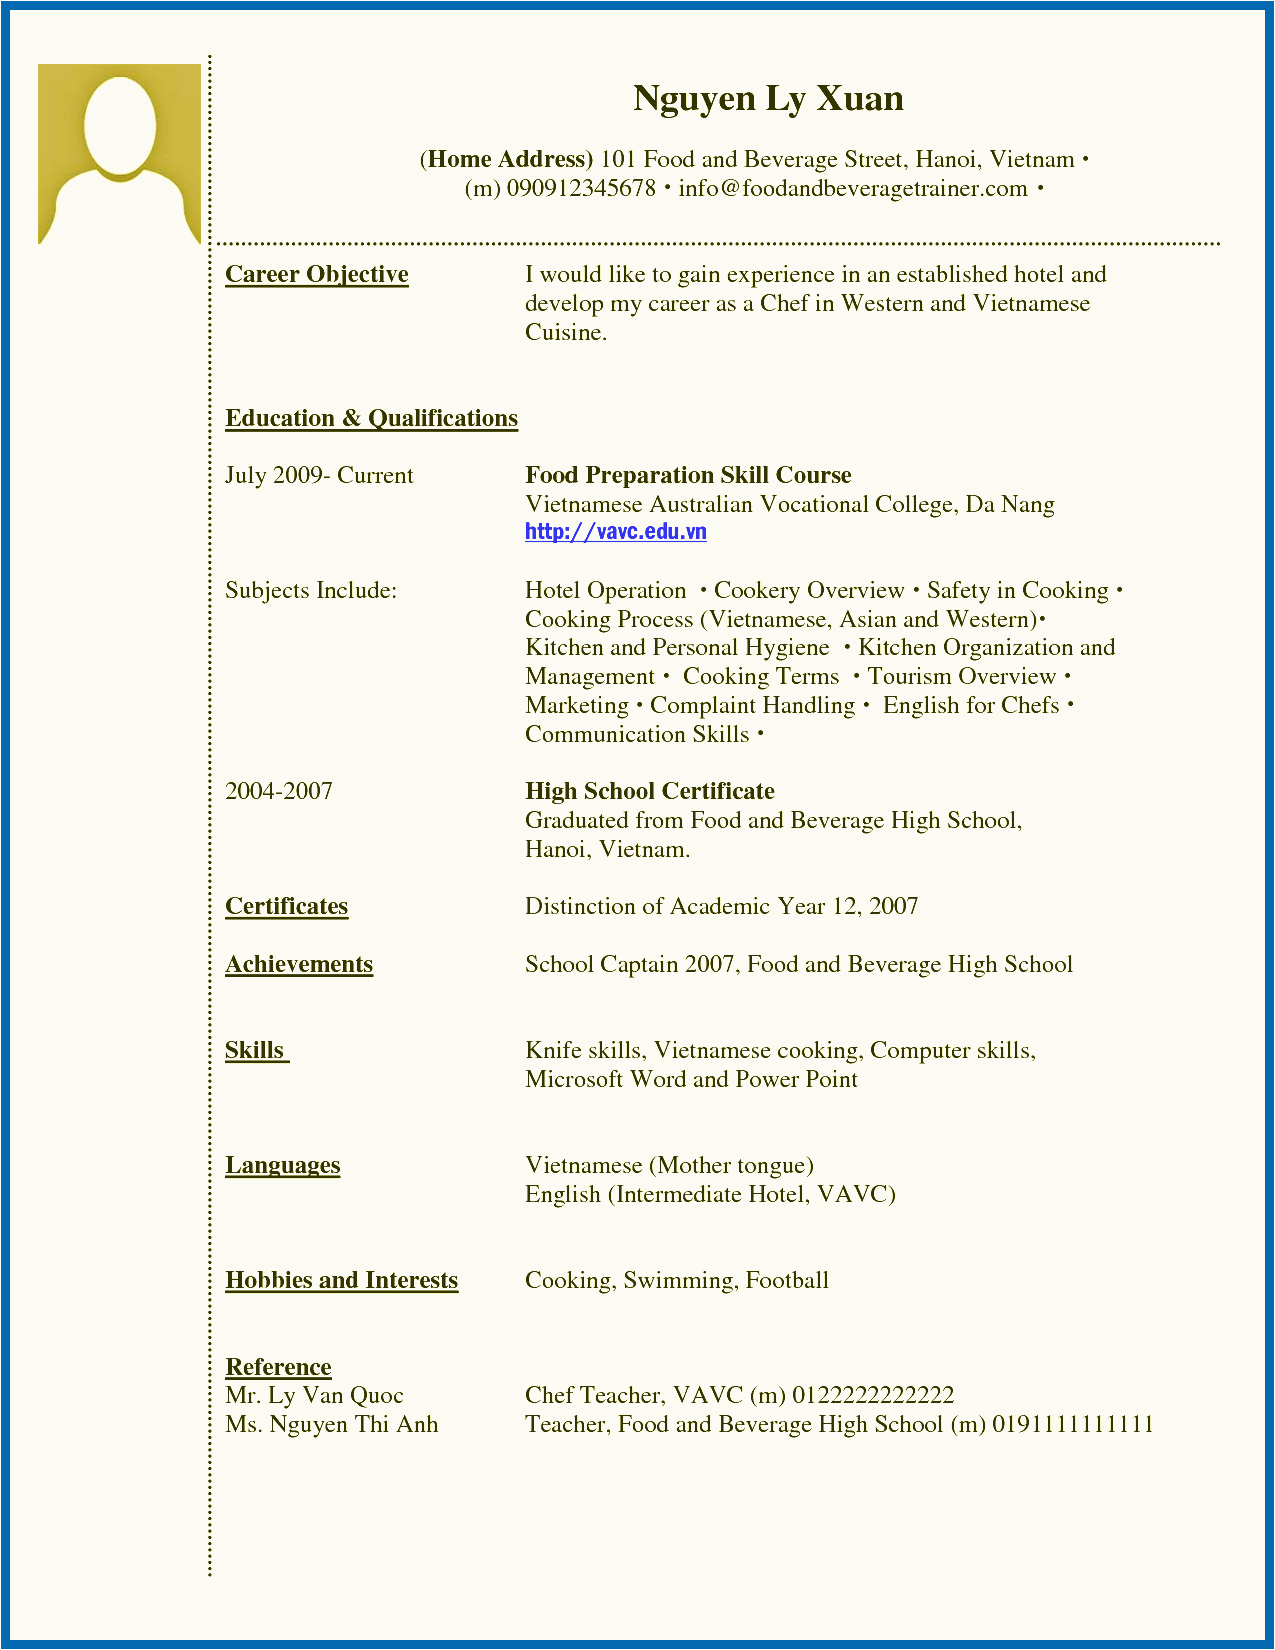 Sample Resume format for Students with No Experience 12 13 Cv Samples for Students with No Experience